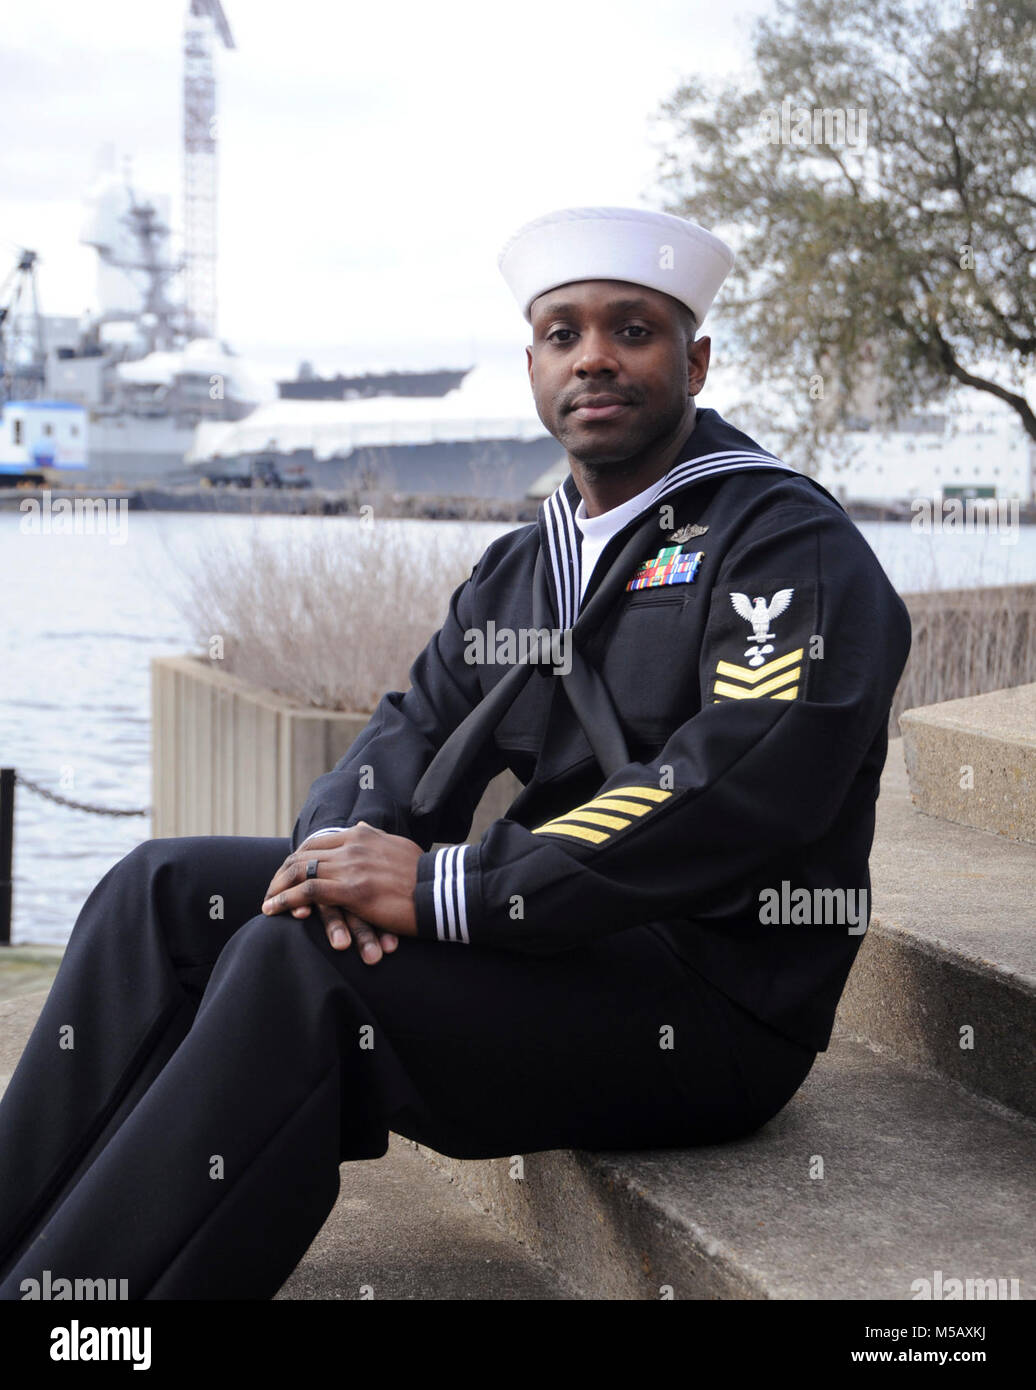 NORFOLK (Feb. 5, 2018) Machinistís Mate (Auxiliary) 1st Class Anthony Phillips, a native of Queens, NY., assigned to Regional Support Group Groton, Submarine Force Atlantic 2017 Shore Sailor of the Year candidate. The Sailor of the Year program was established in 1972 by the Chief of Naval Operations Adm. Elmo Zumwalt and Master Chief Petty Officer of the Navy John Whittet to recognize an individual Sailor who best represented the ever-growing group of dedicated professional Sailors at each command and ultimately the Navy. (U.S. Navy Stock Photo